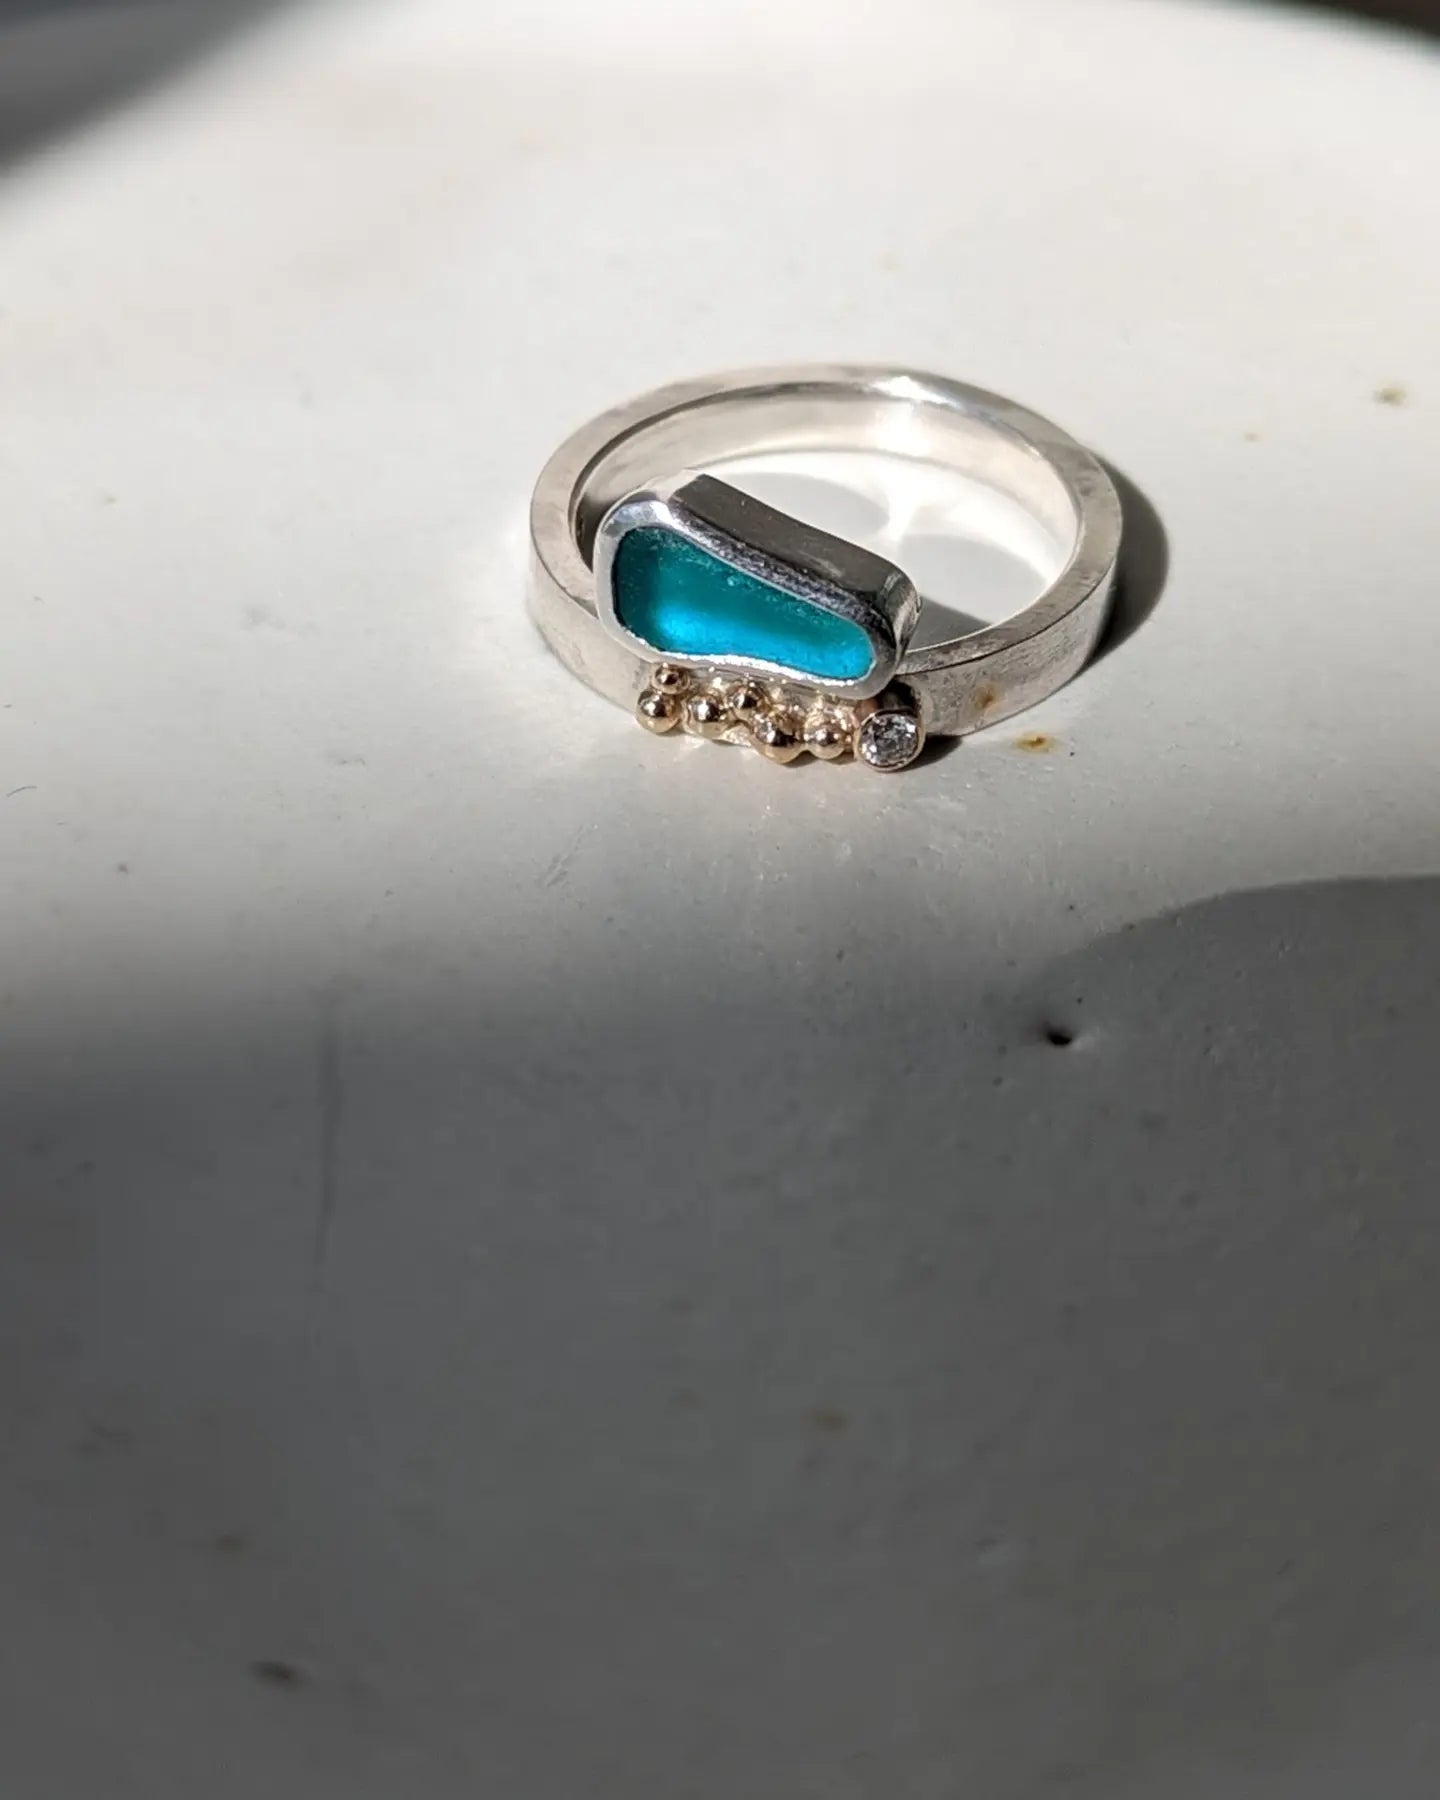 Turquoise sea glass ring with gold granules and moissanite - Booblinka Jewellery